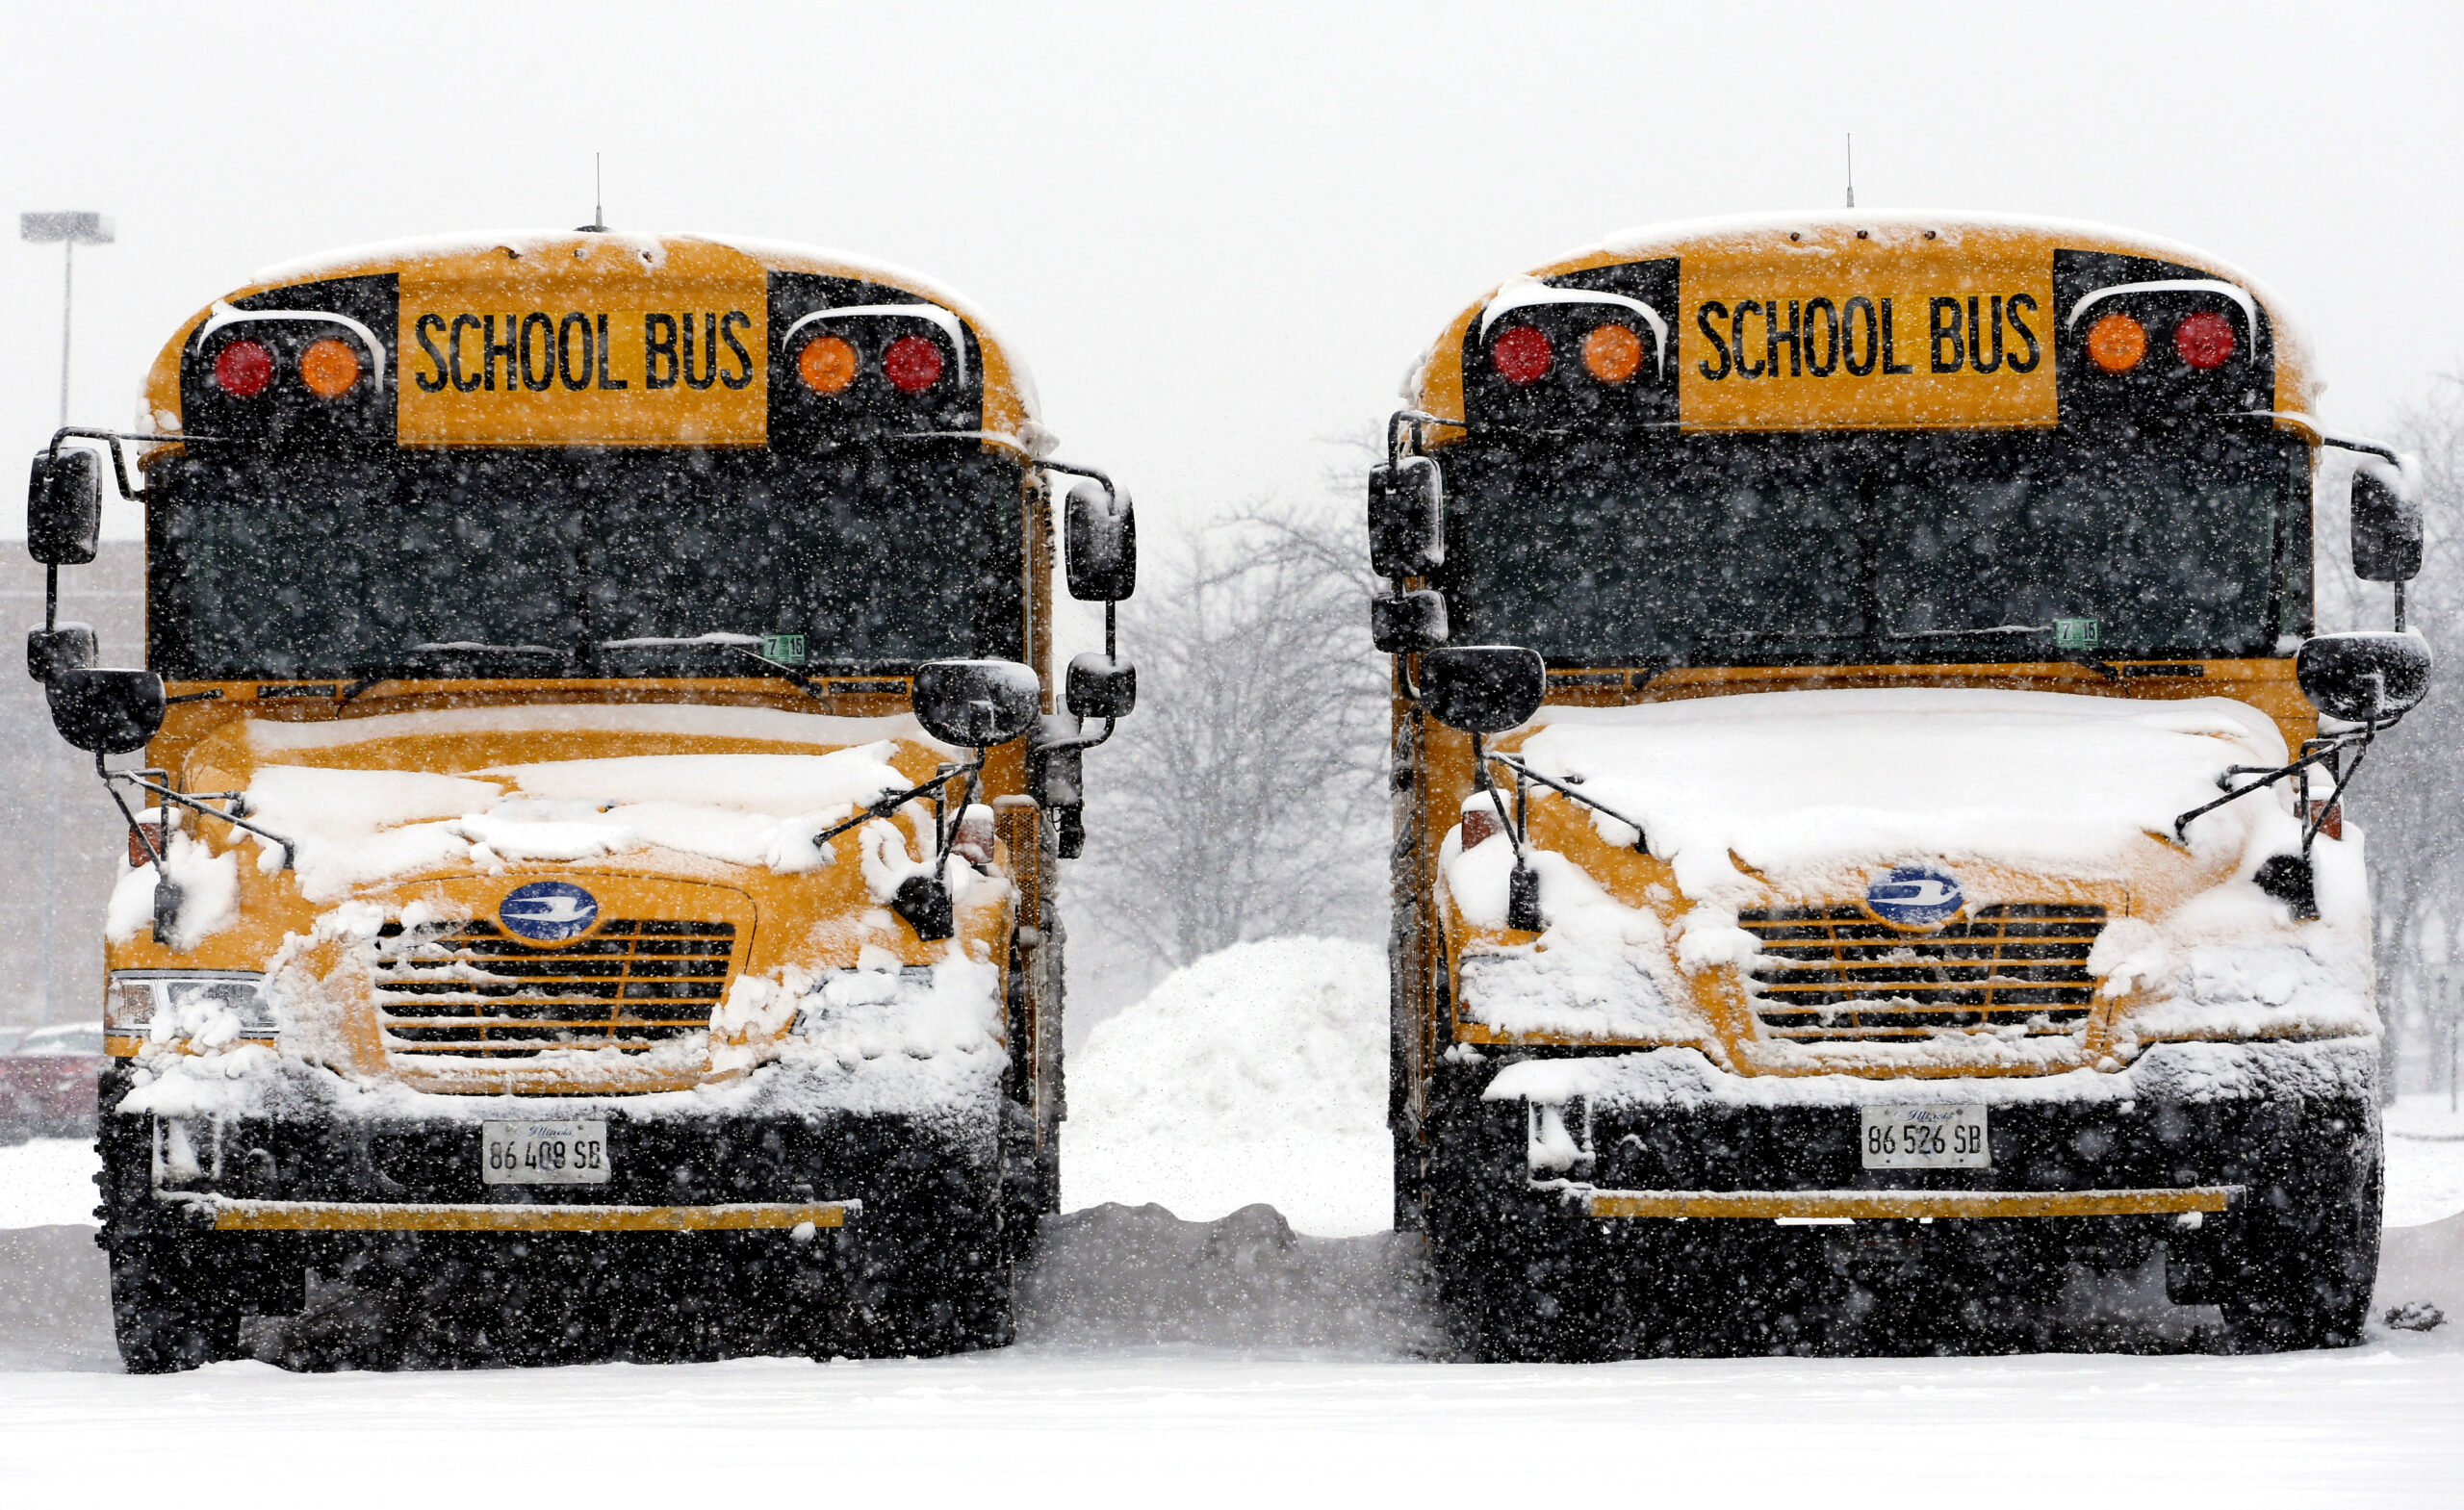 School buses are covered by snow.